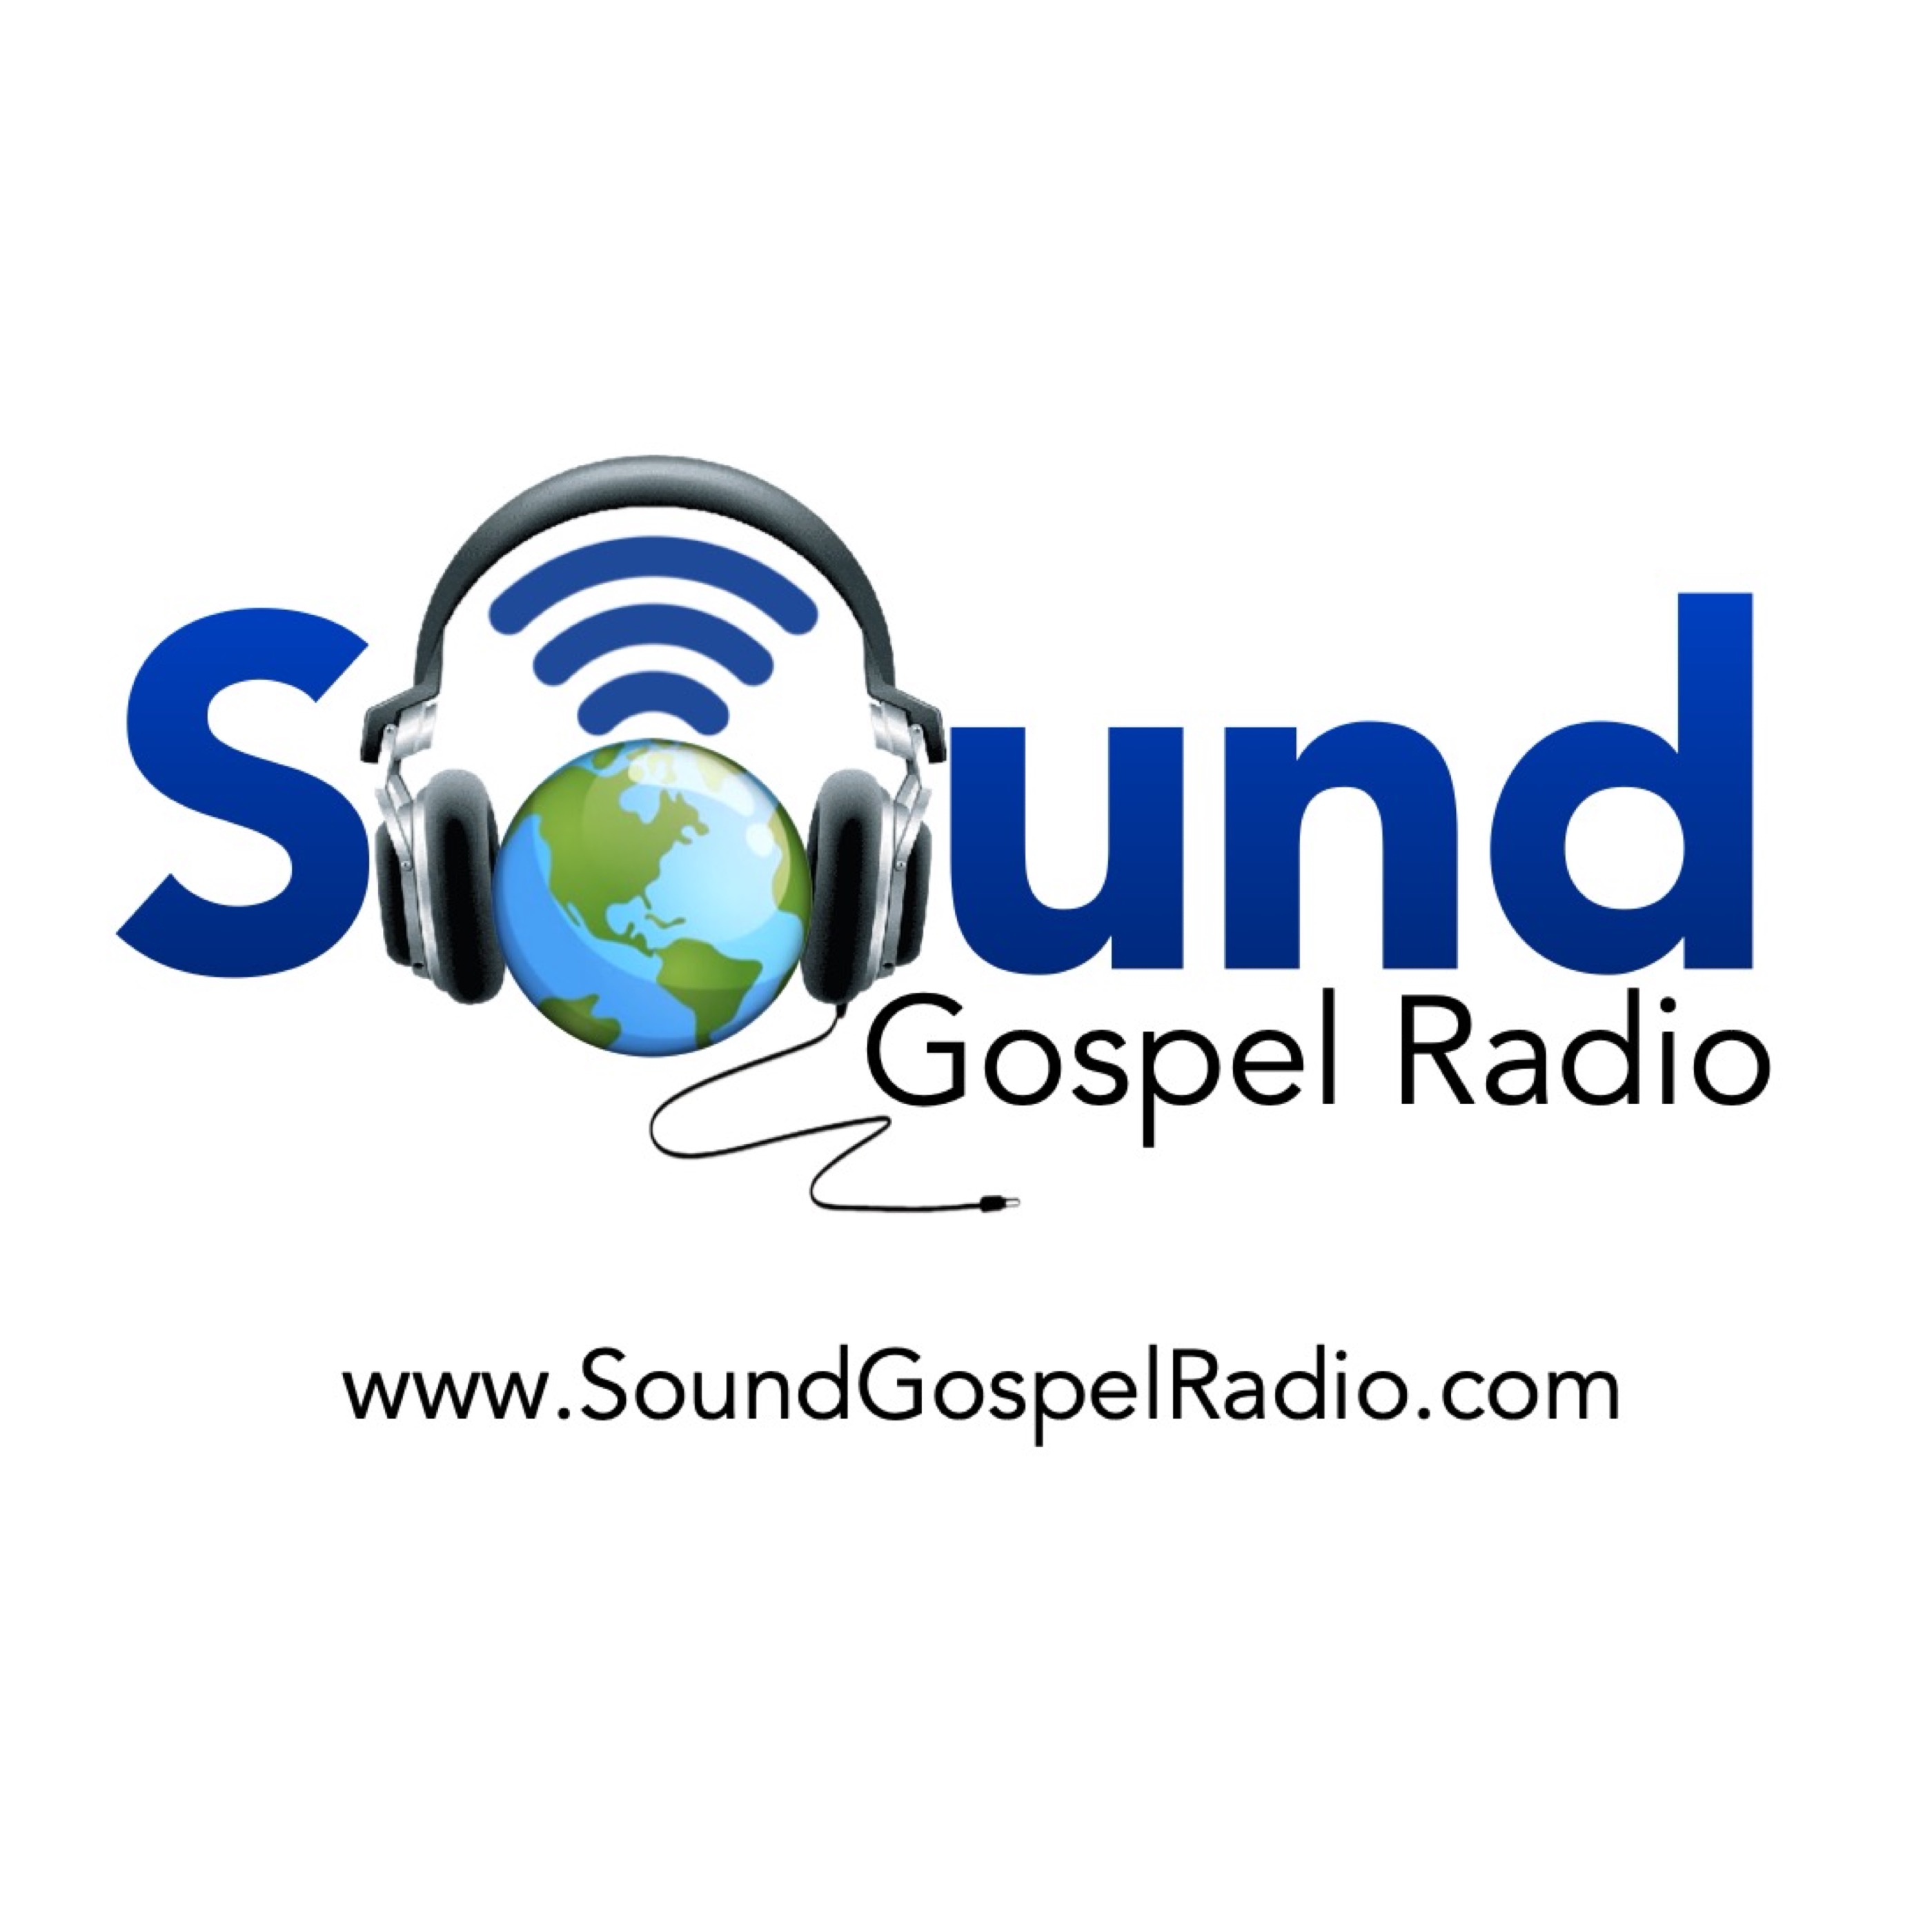 Art for THE GREATEST STATION by Sound Gospel Radio